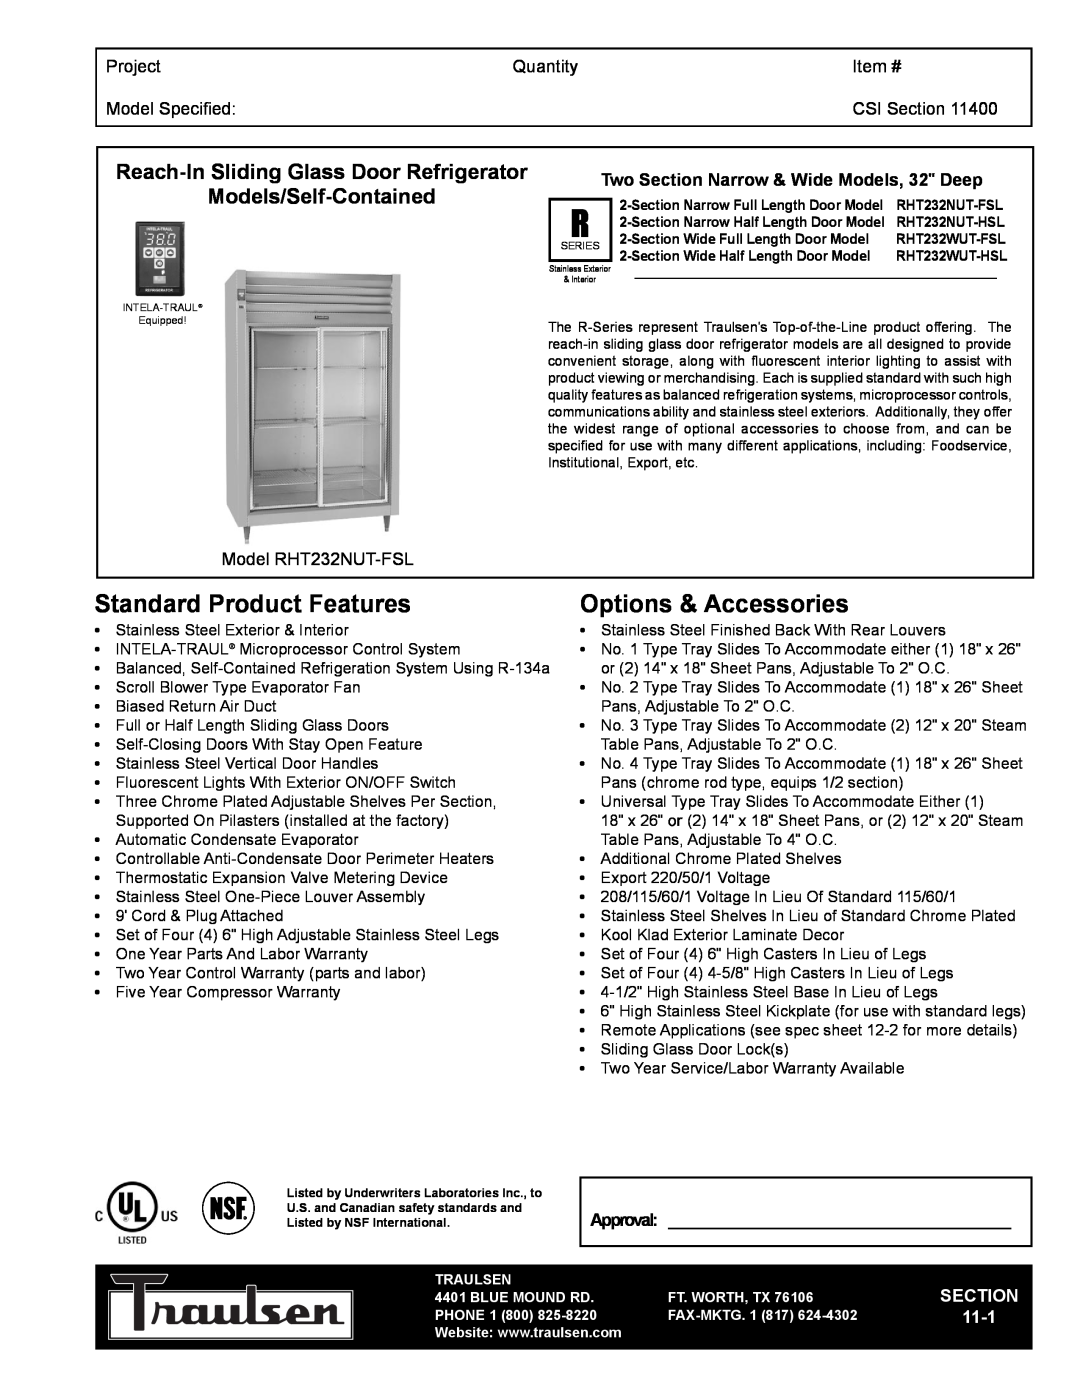 Traulsen RHT232WUT-HSL warranty Reach-InSliding Glass Door Refrigerator, Models/Self-Contained, Project, Quantity, Item # 